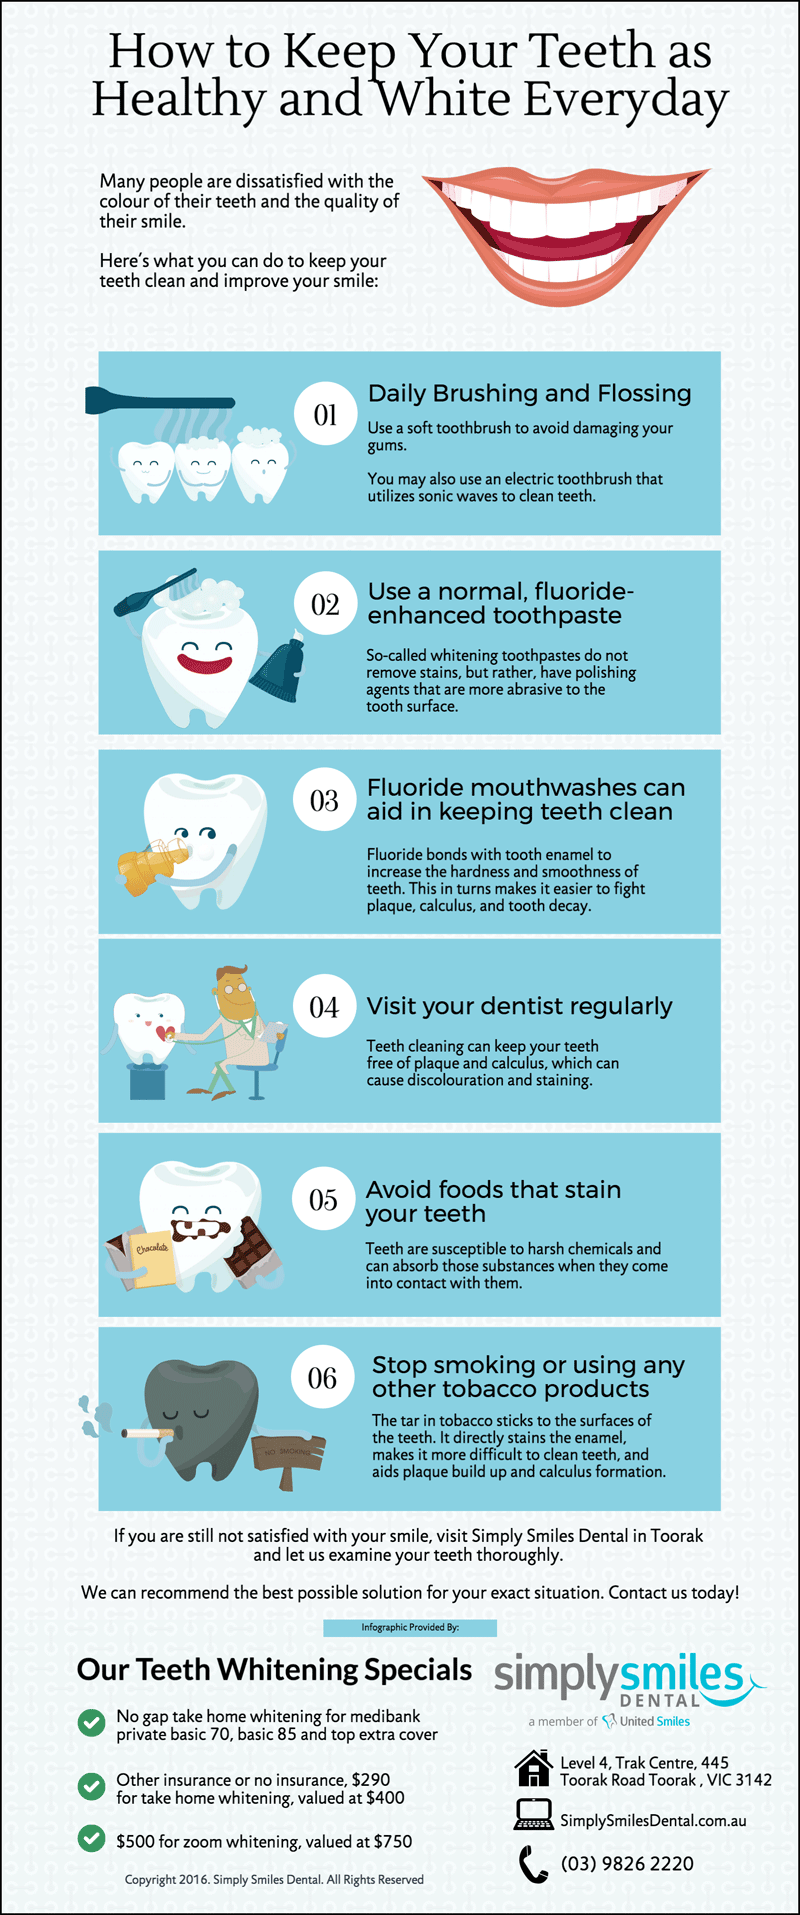 How To Keep Your Teeth As Healthy And White Everyday